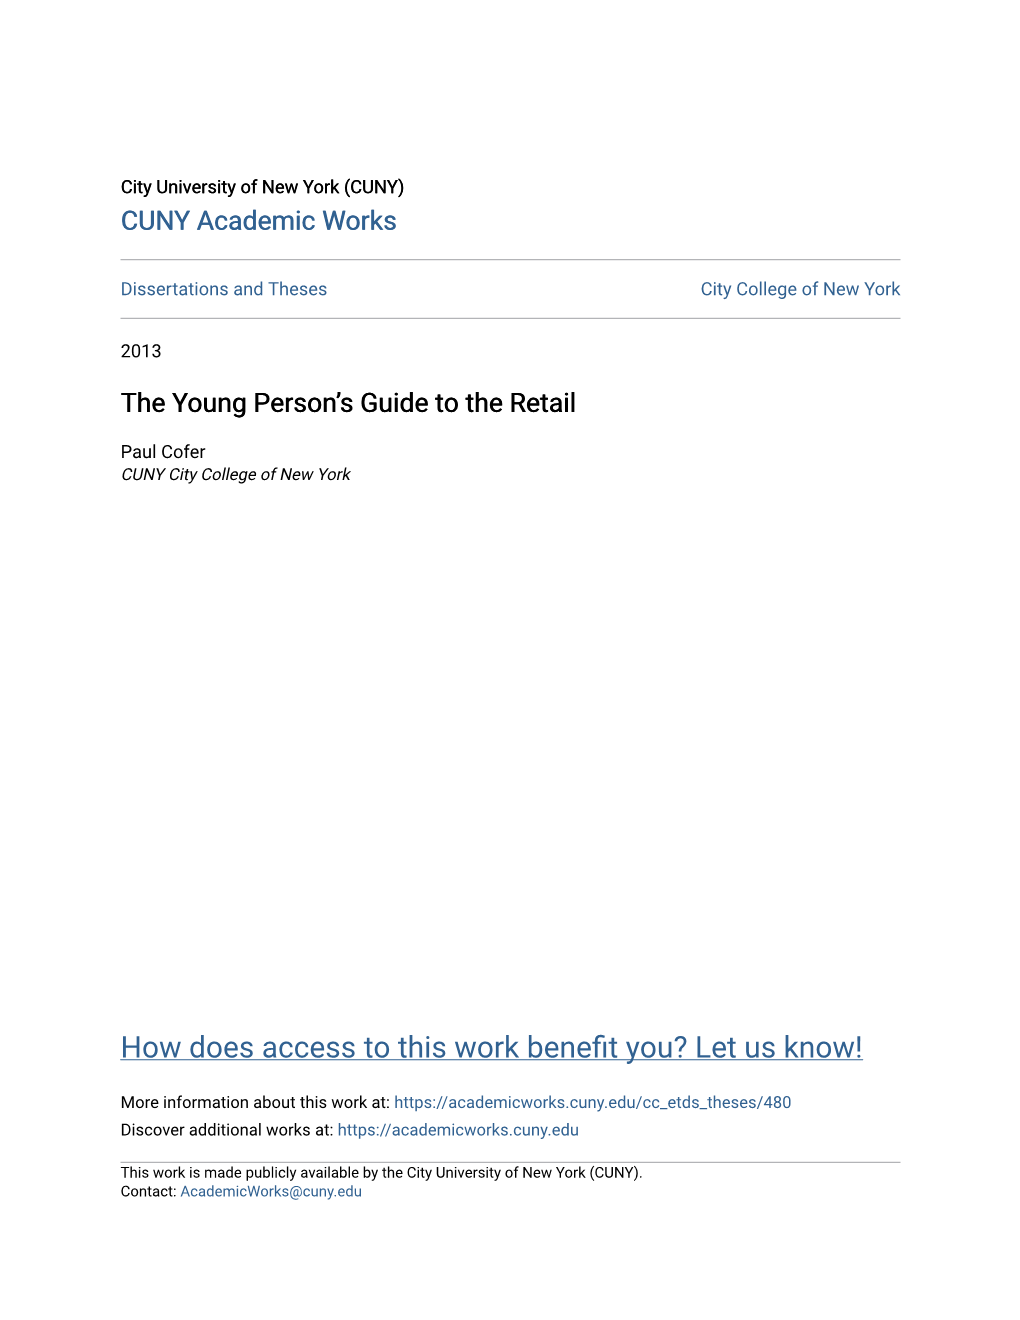 The Young Personâ•Žs Guide to the Retail